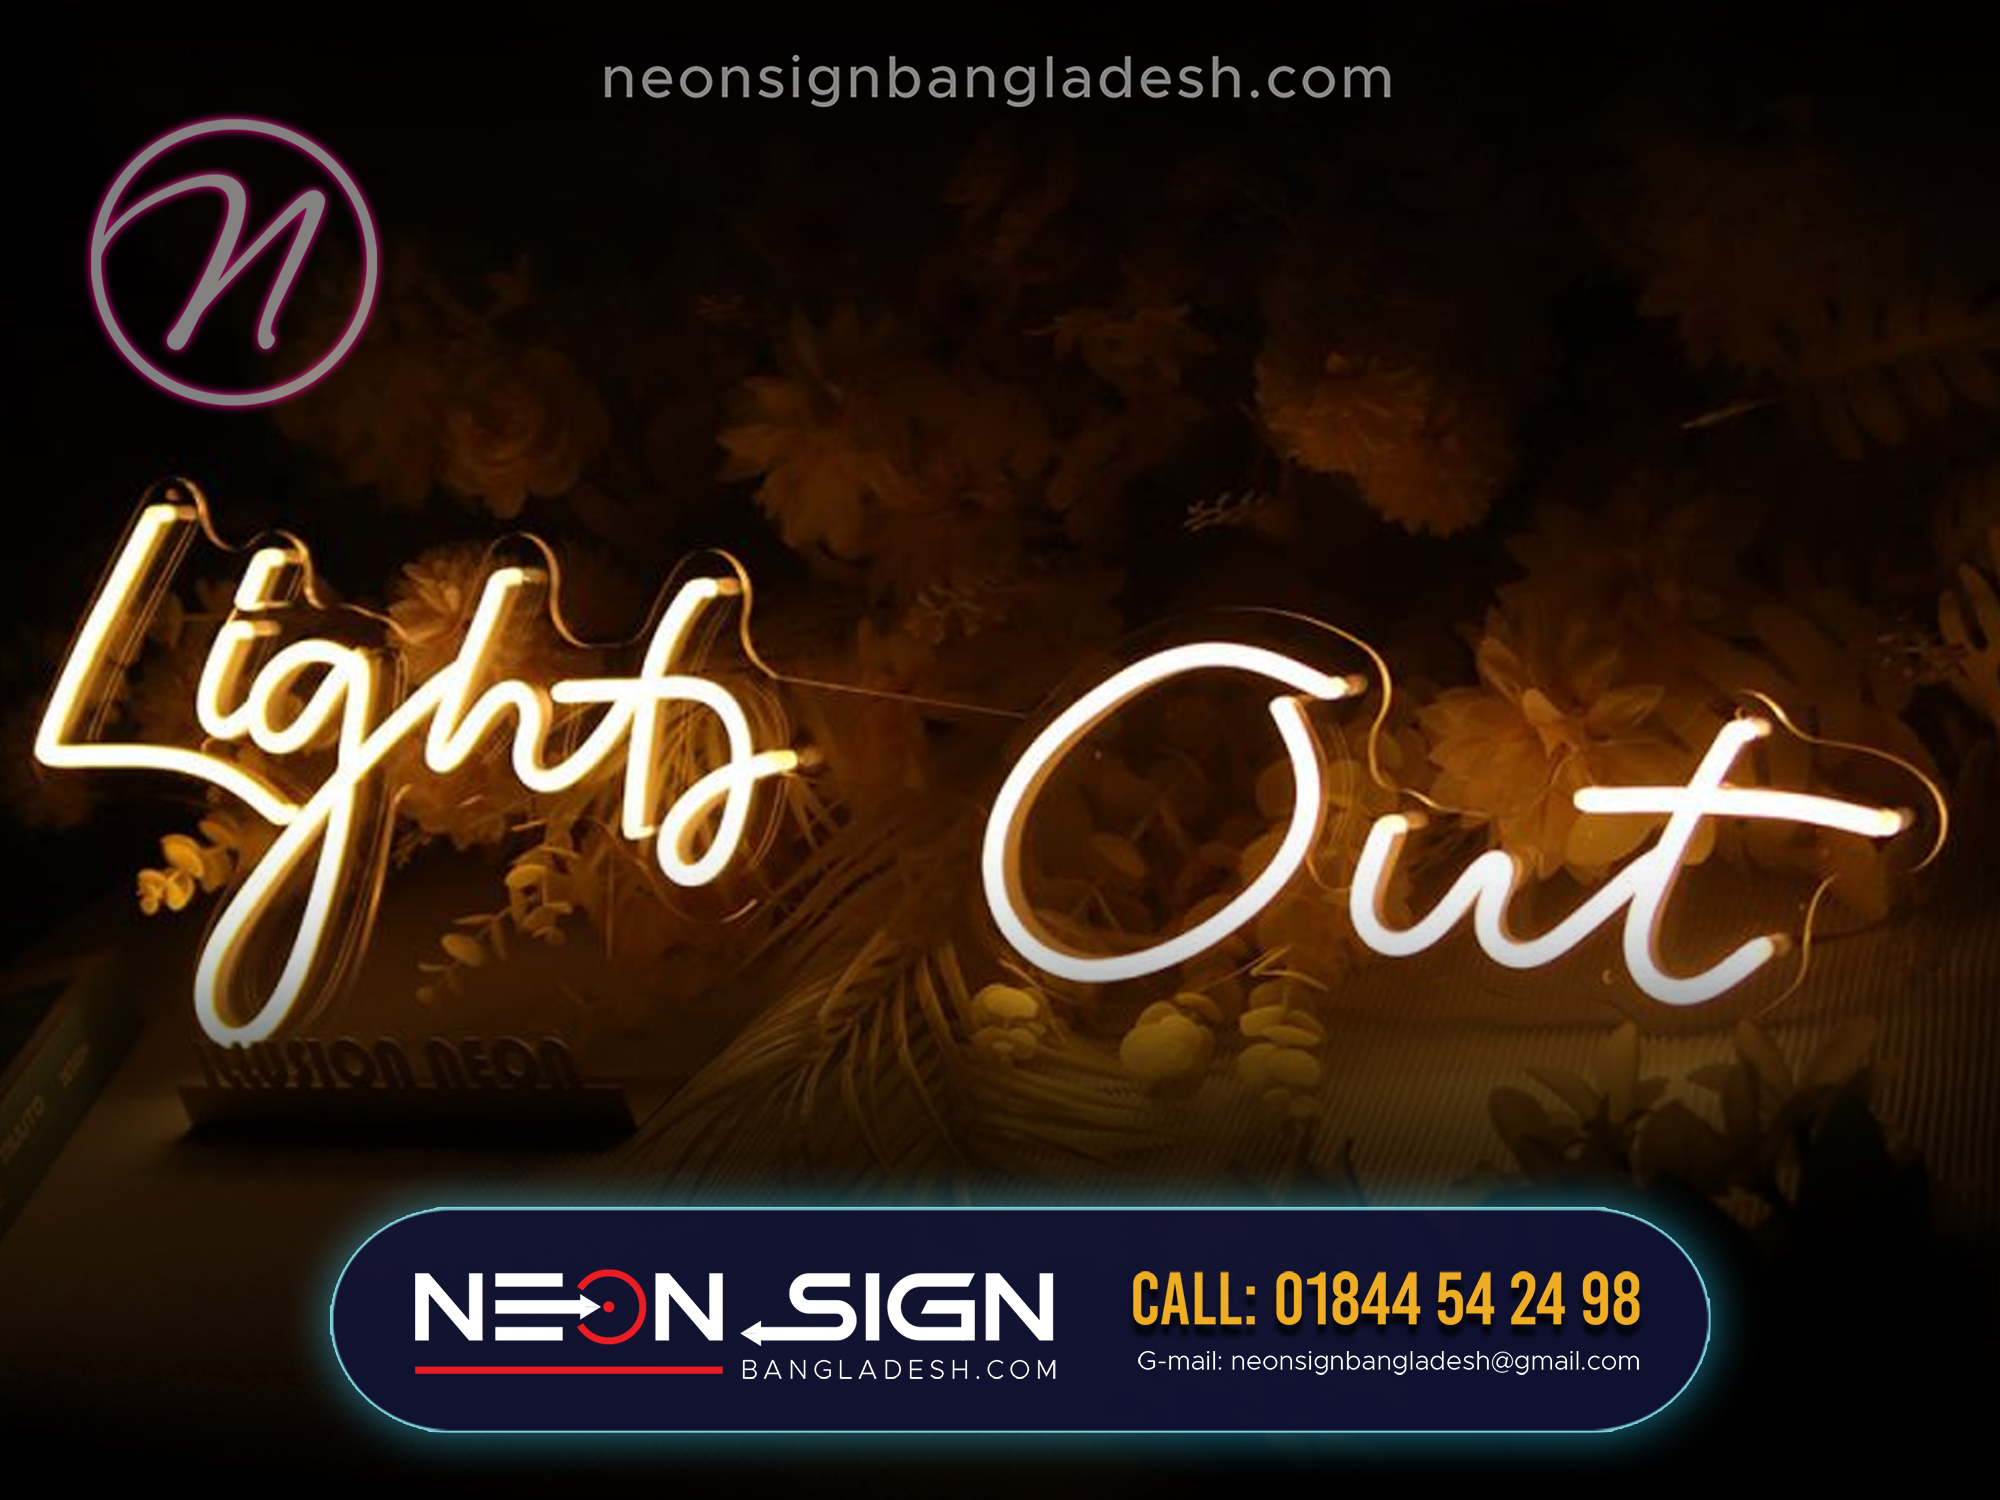 Personalized neon signs for shop signs bd. Outdoor neon signs for shop signs bd. Customizable neon signs for shop signs bd. Custom neon signs for shop signs bd. Best neon signs for shop signs bd. neon sign price in bd. bangladesh neon sign. custom neon signs bd.